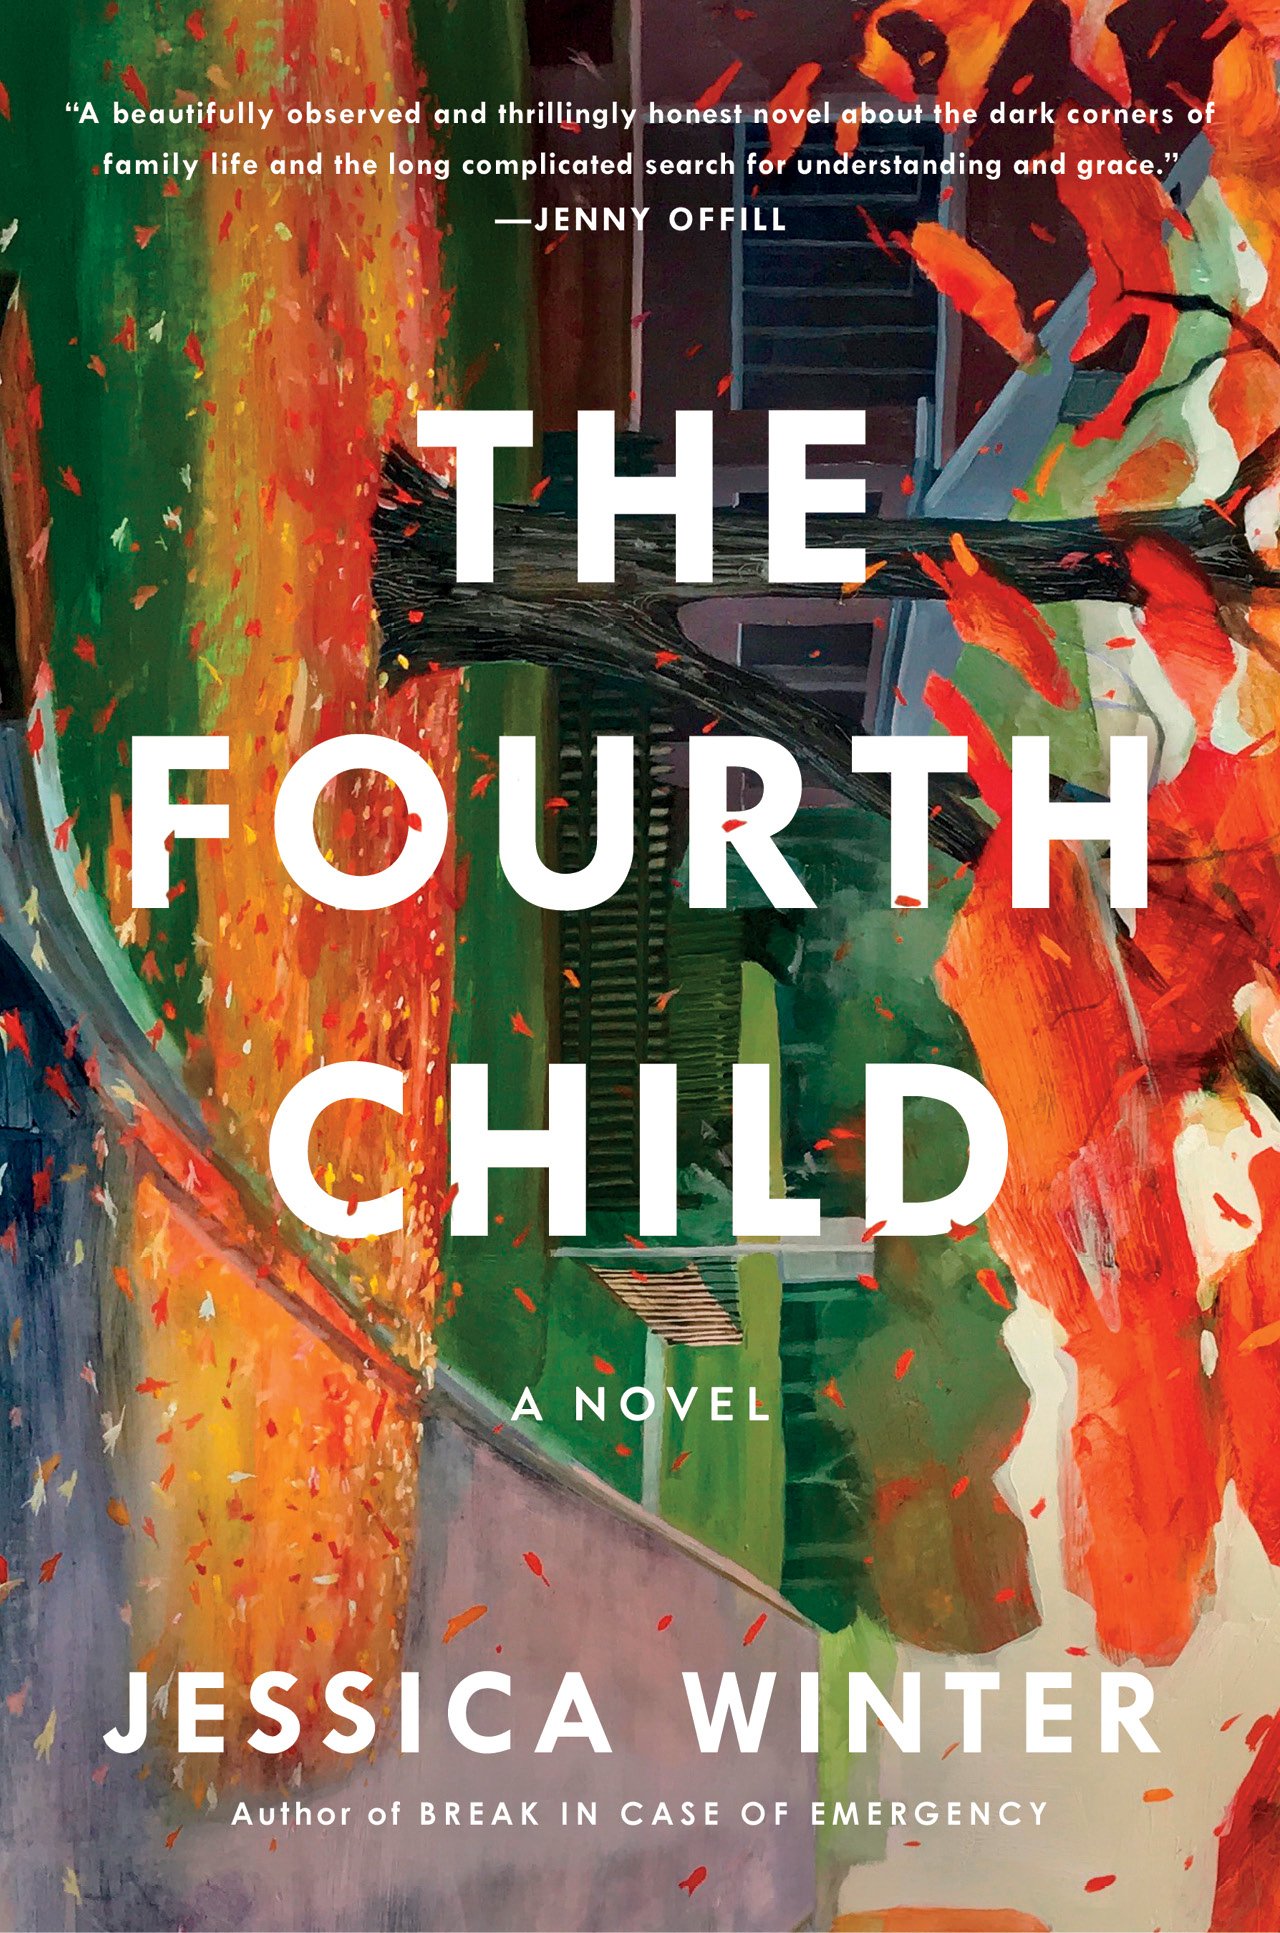 The Fourth Child by Jessica Winter